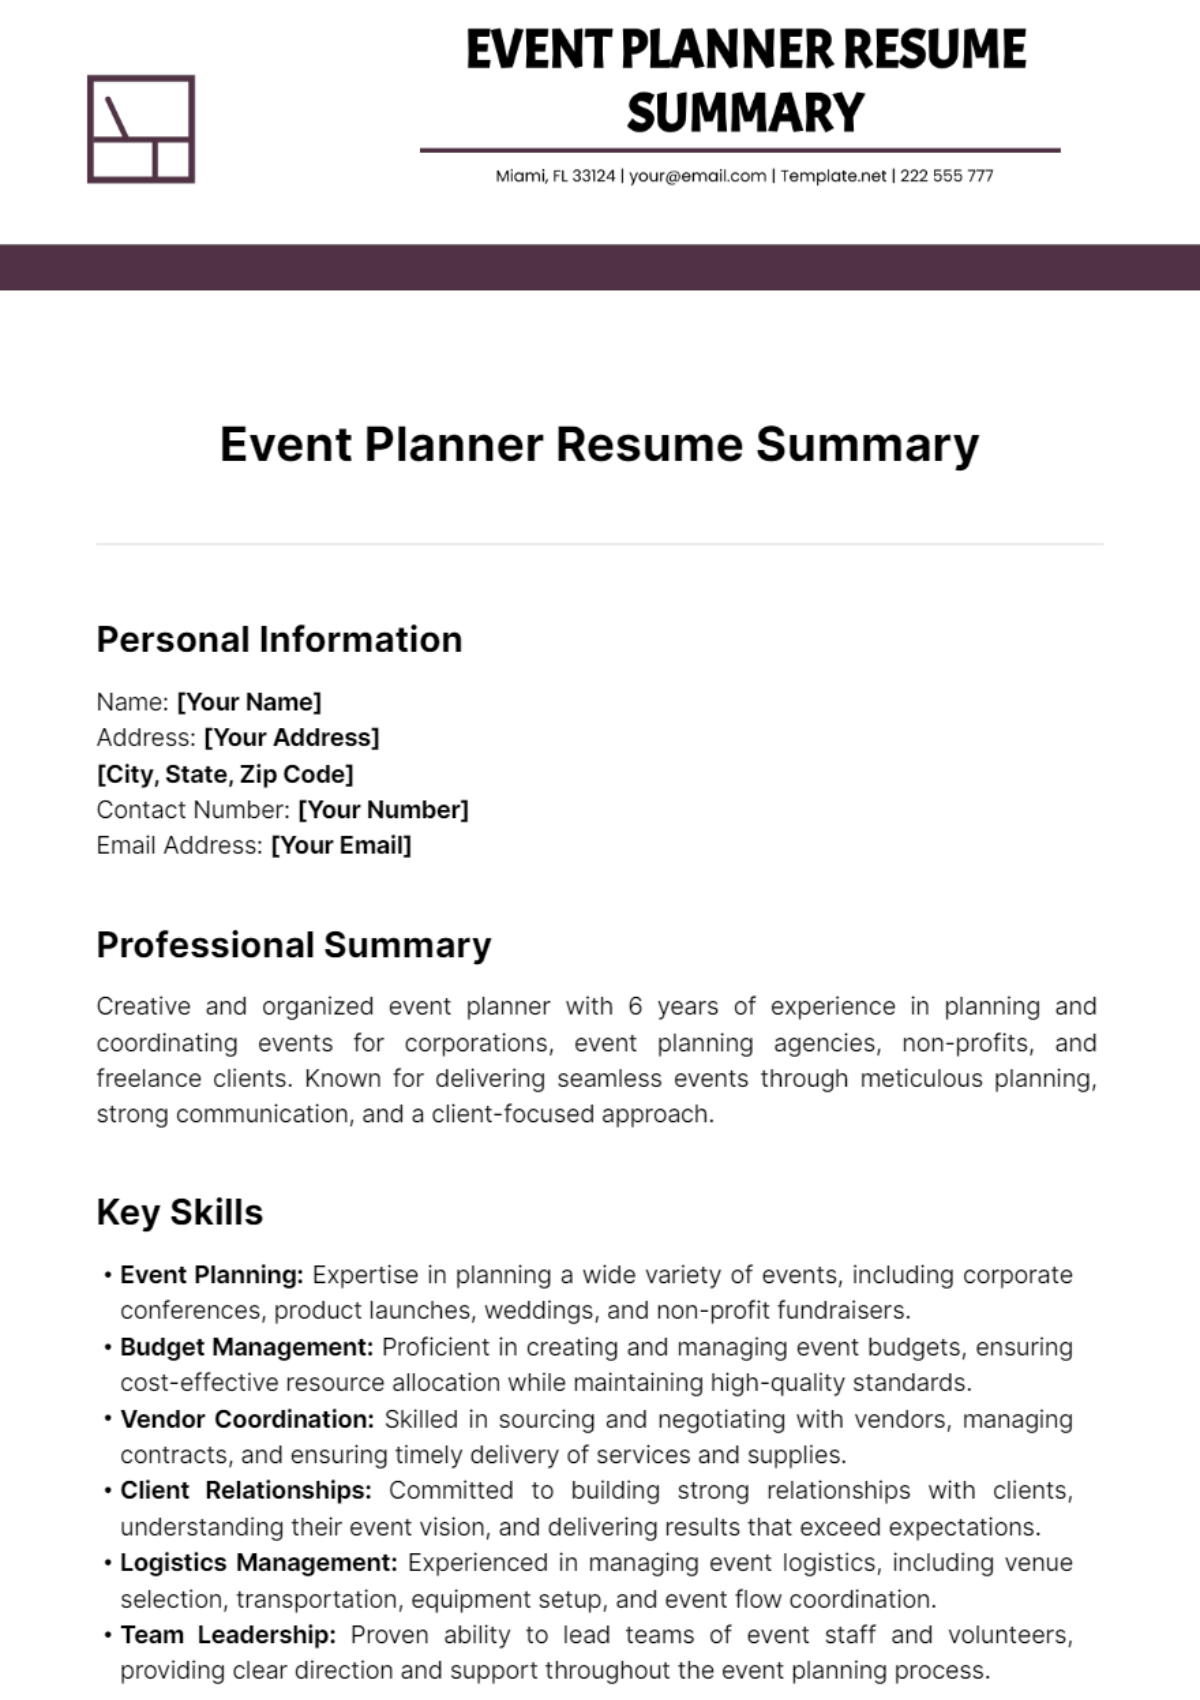 Free Event Planner Resume Summary Template